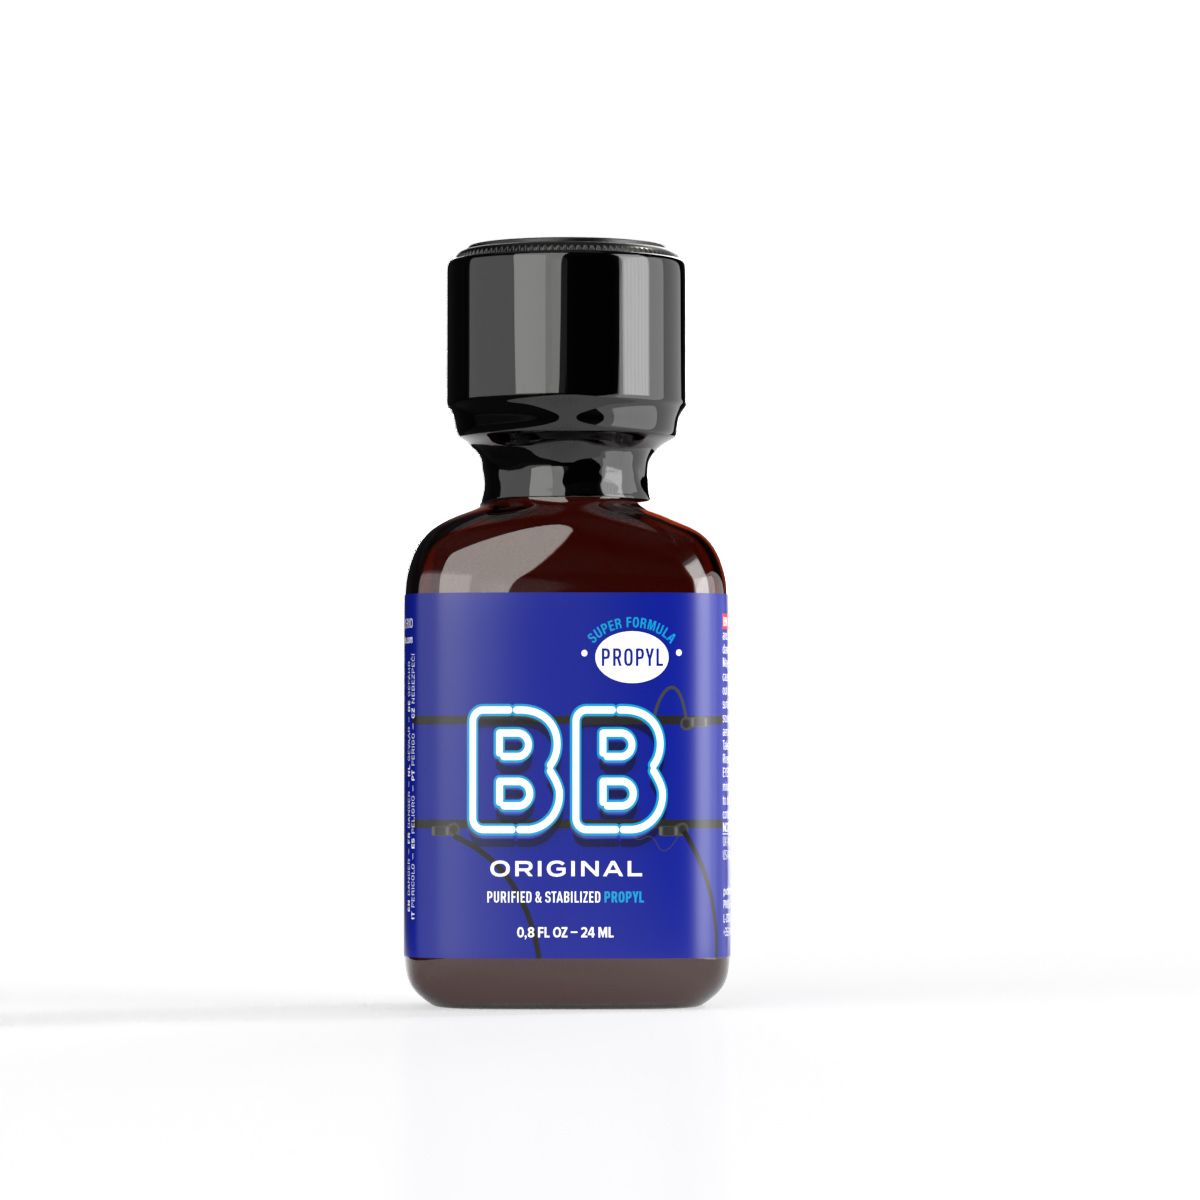 A small BB PROPYL 24ml bottle with a black cap and a blue label that reads "BB PROPYL original" on a white background.